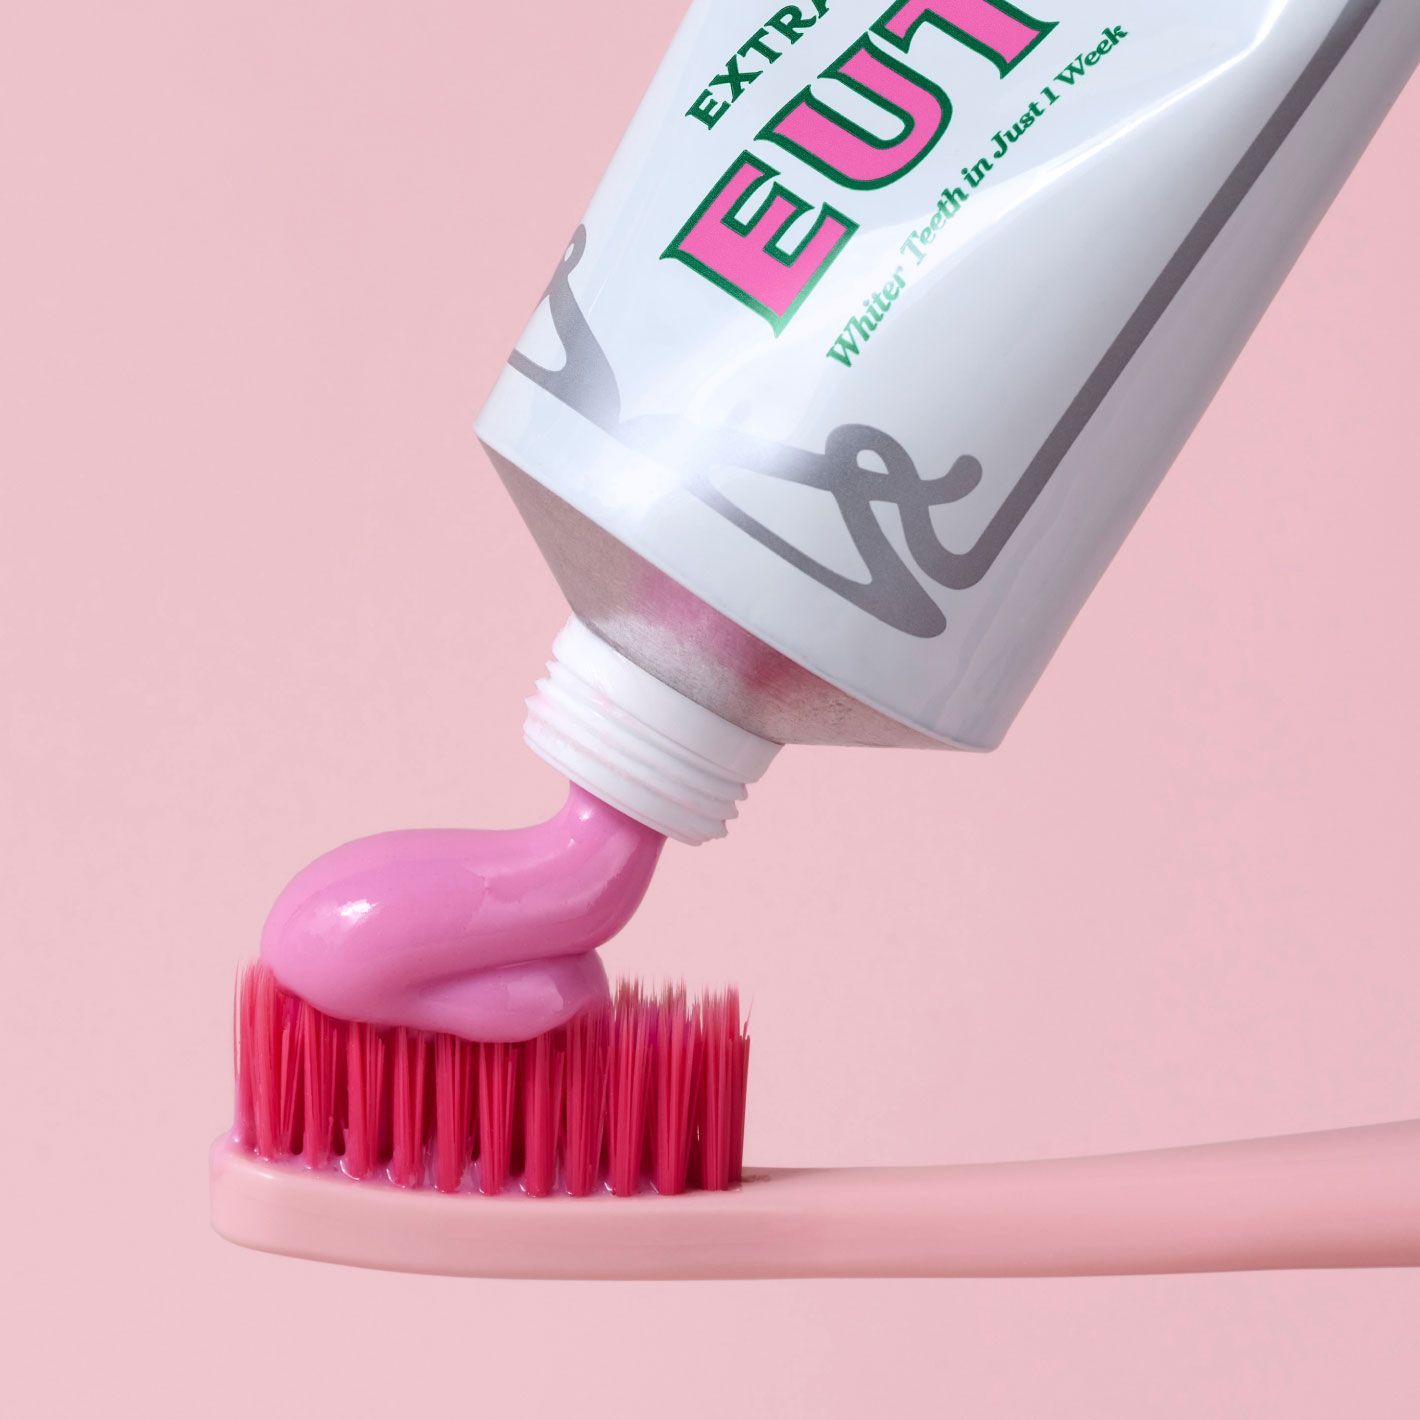 Pink Euthymol Whitening Toothpaste squeezed from a white tube onto a pink Euthymol Toothbrush.